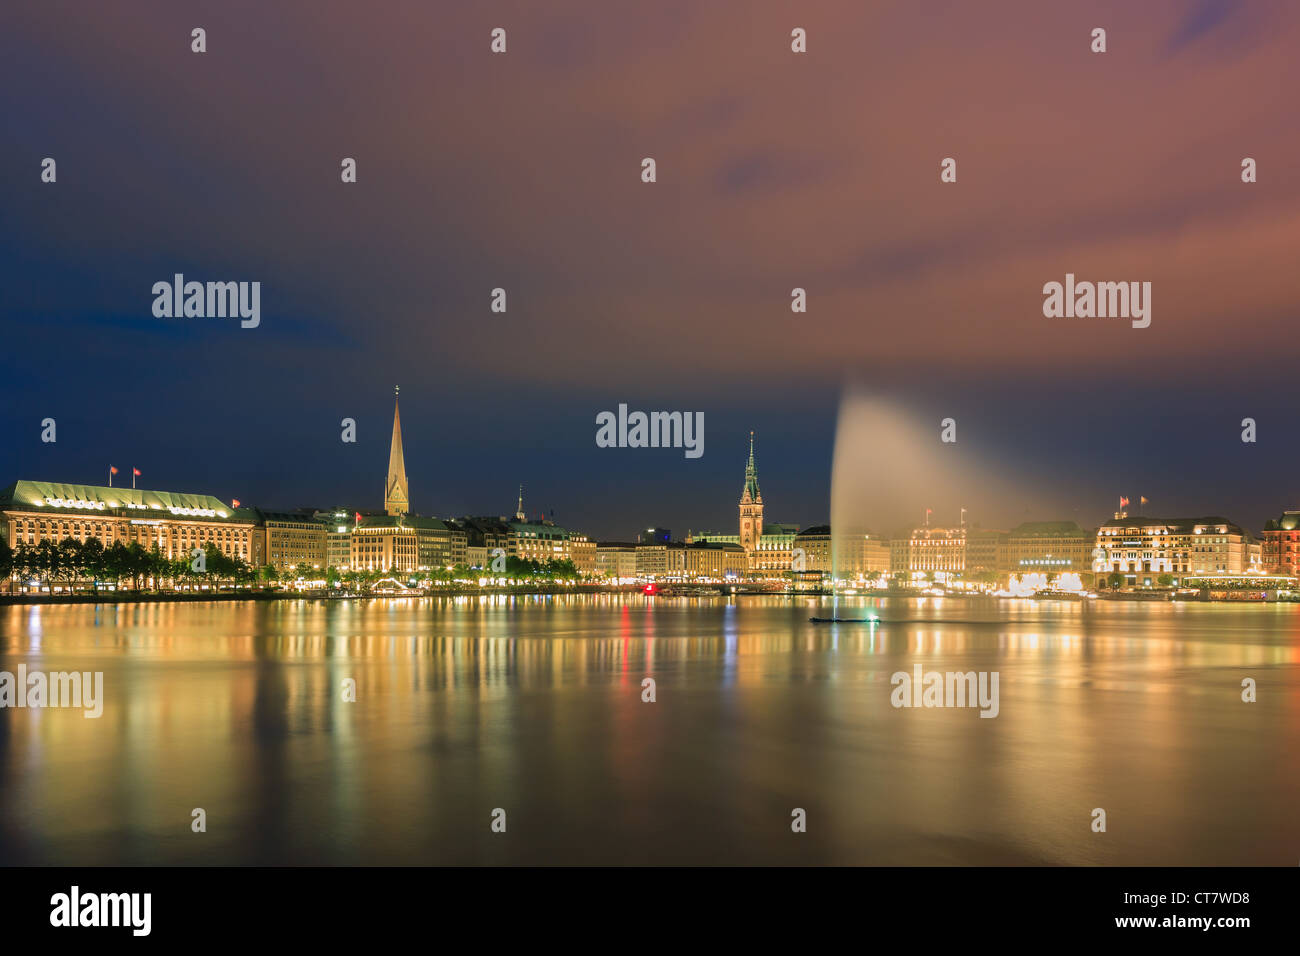 Hamburg skyline taken right after sunset at the blue hour over the binnenalster. Stock Photo